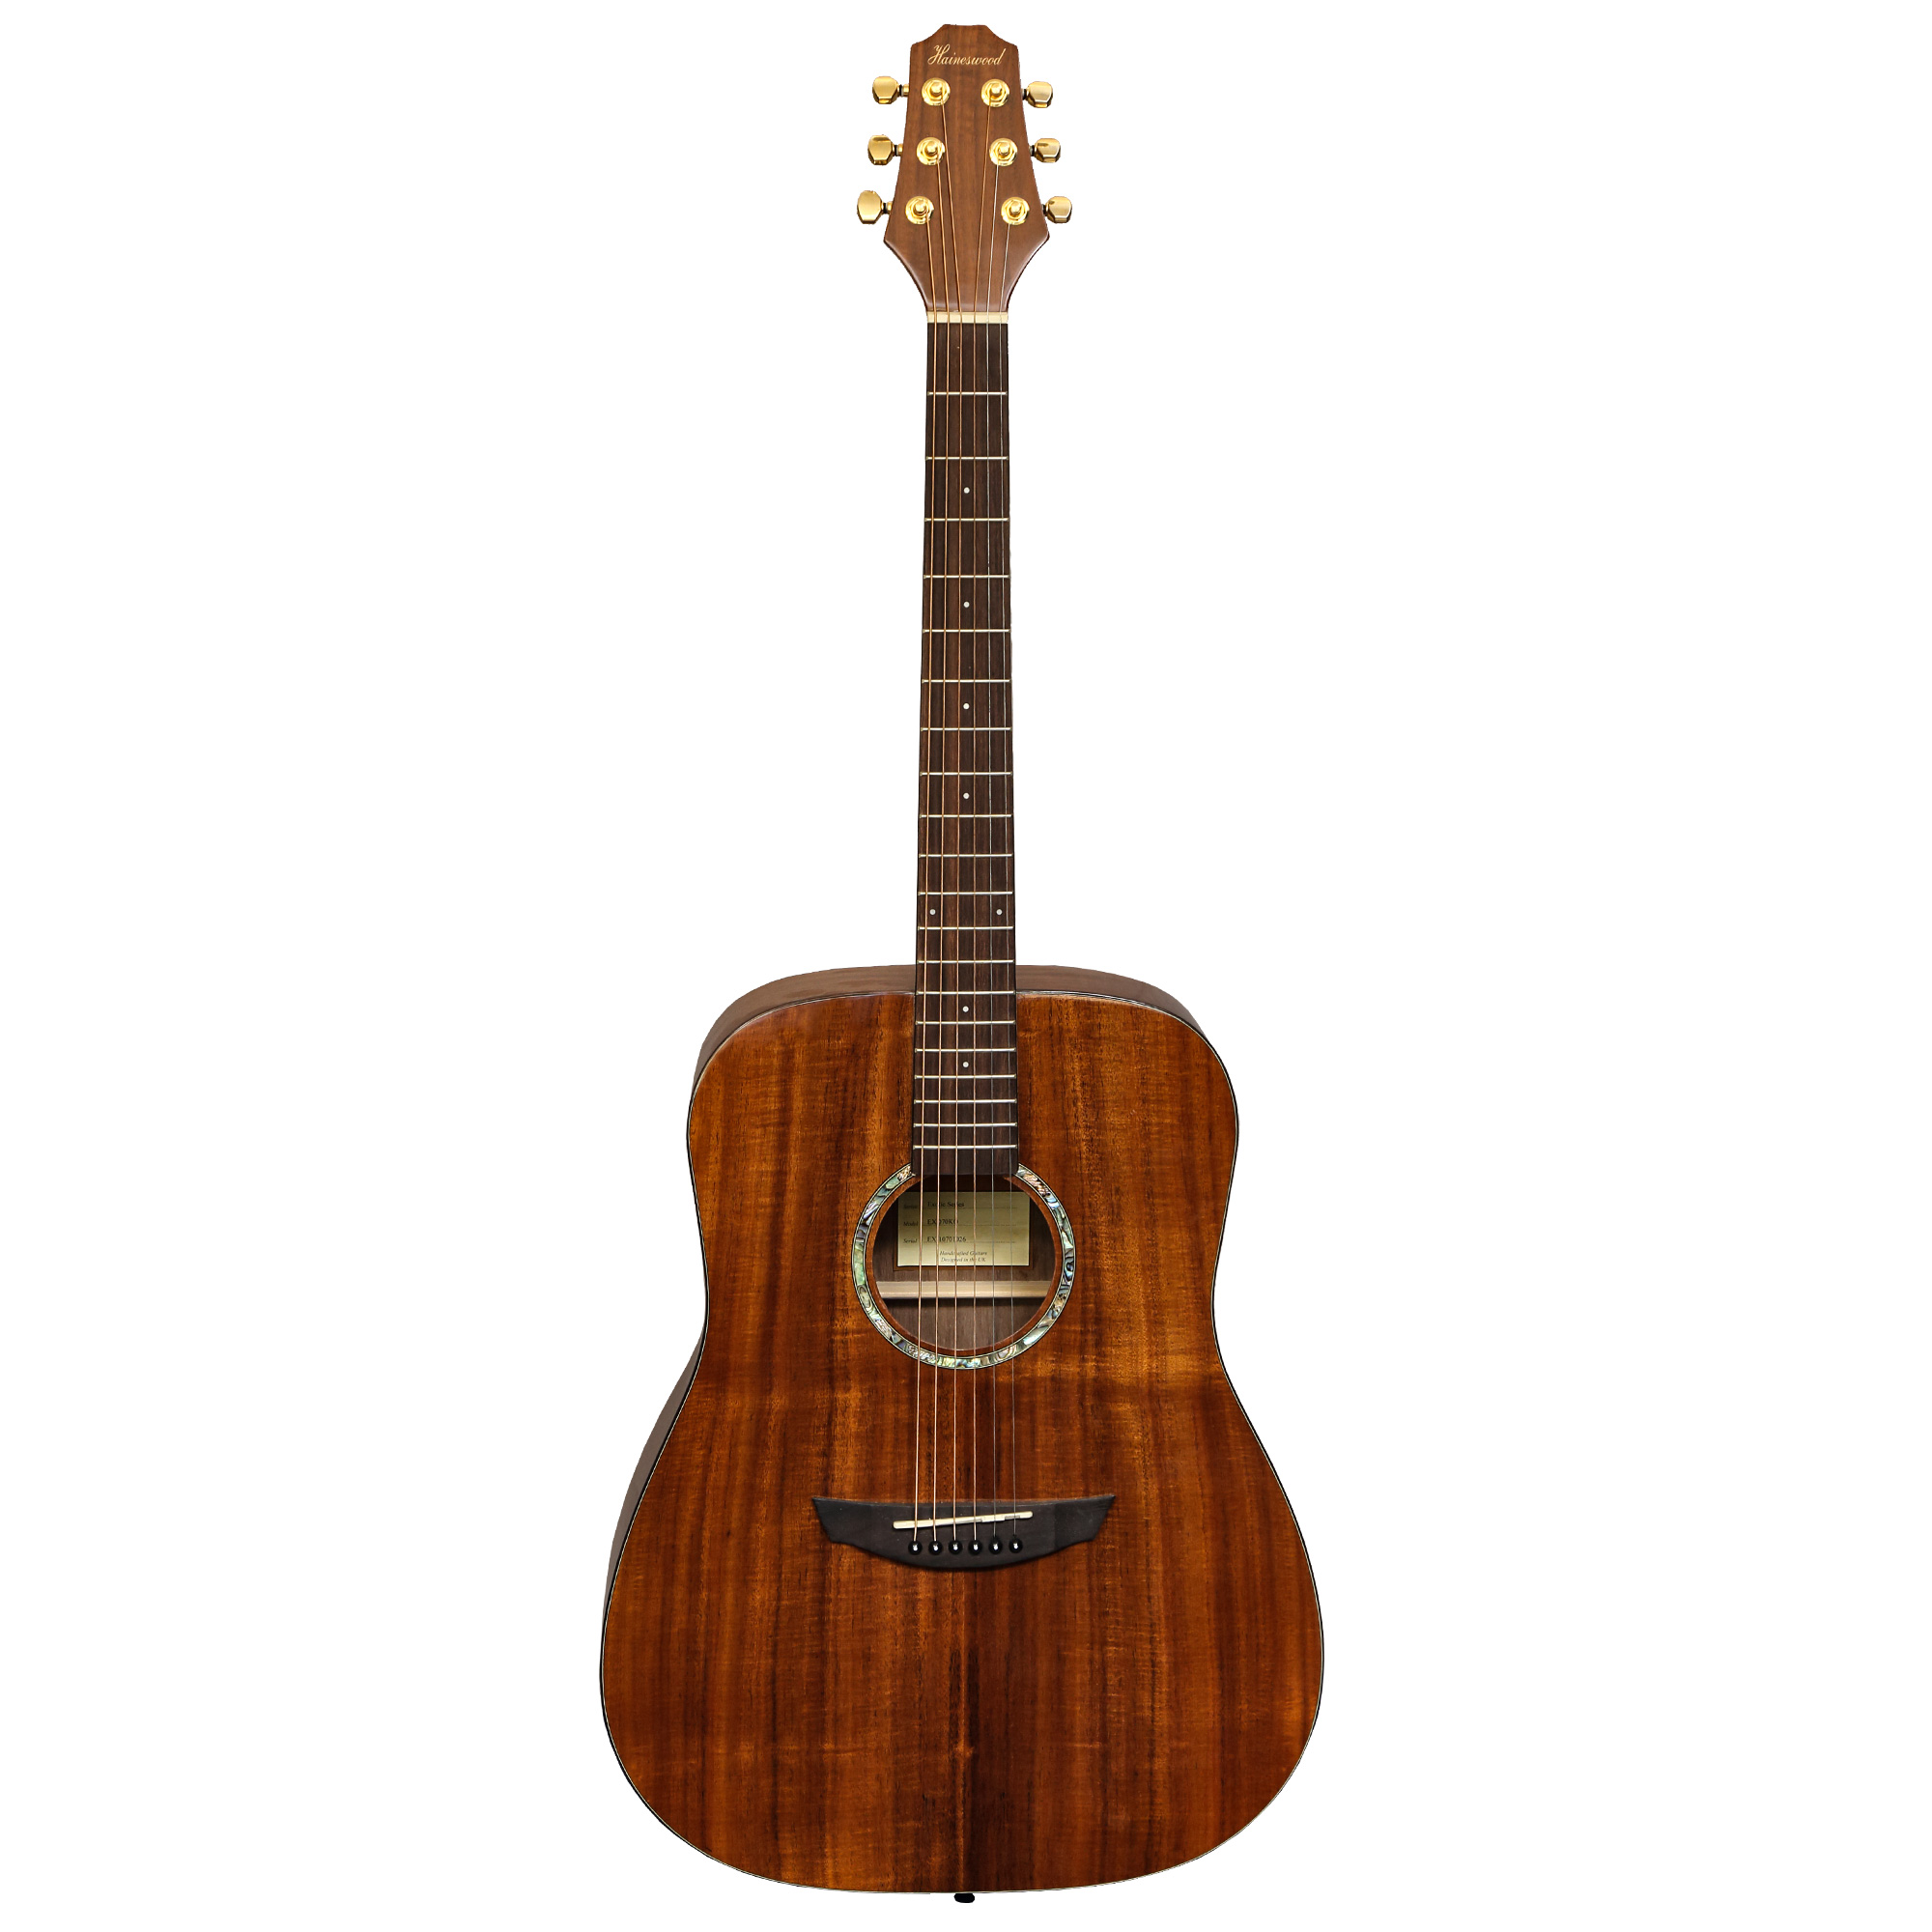 Haineswood Exotic EXD70KO Dreadnought